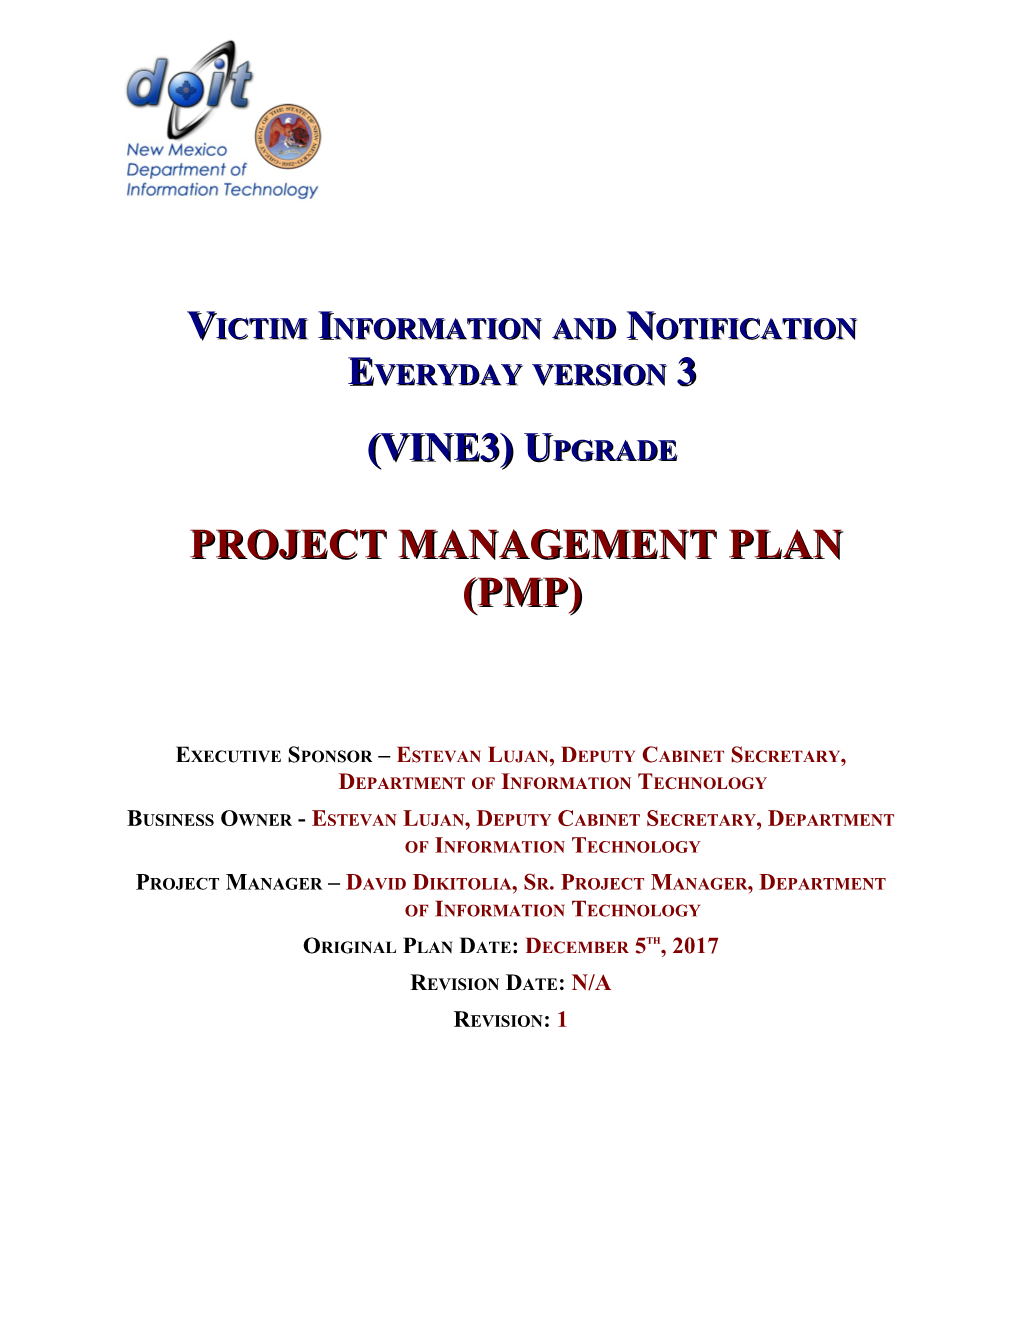 Victim Information and Notification Everyday Version 3